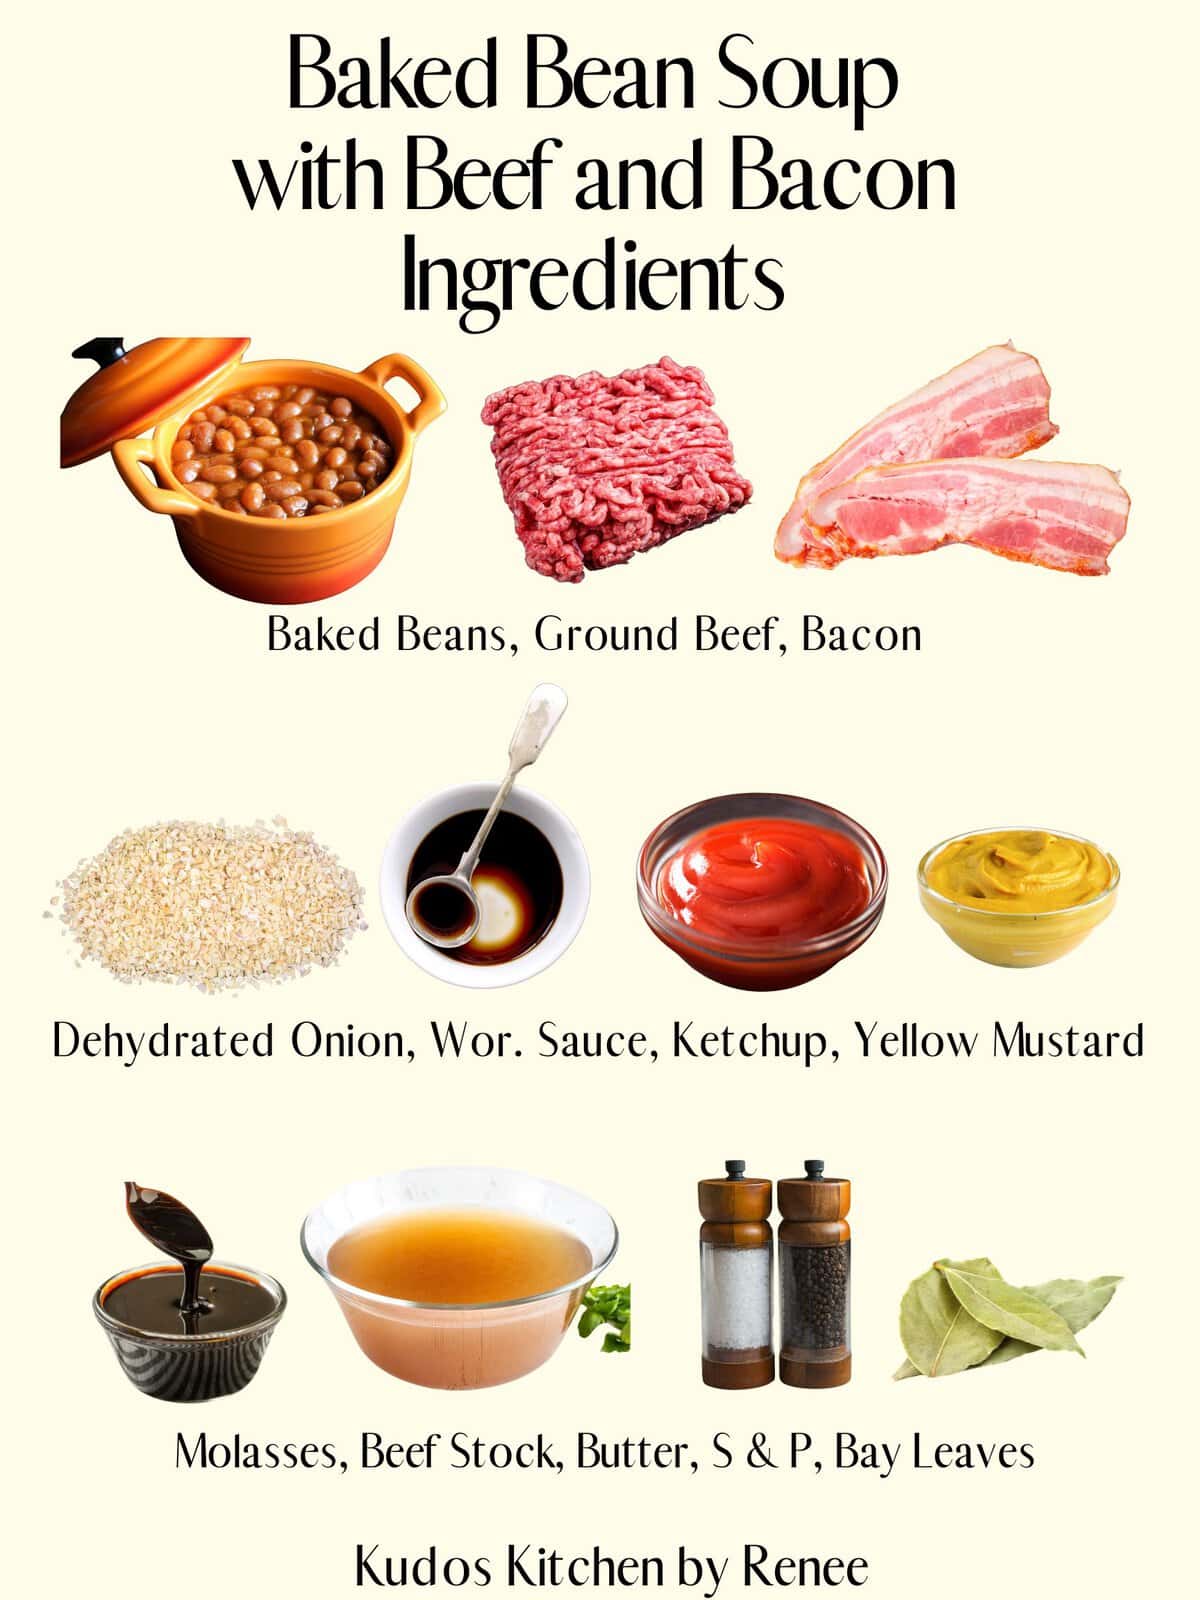 A visual ingredient list for making Baked Bean Soup with Beef and Bacon.